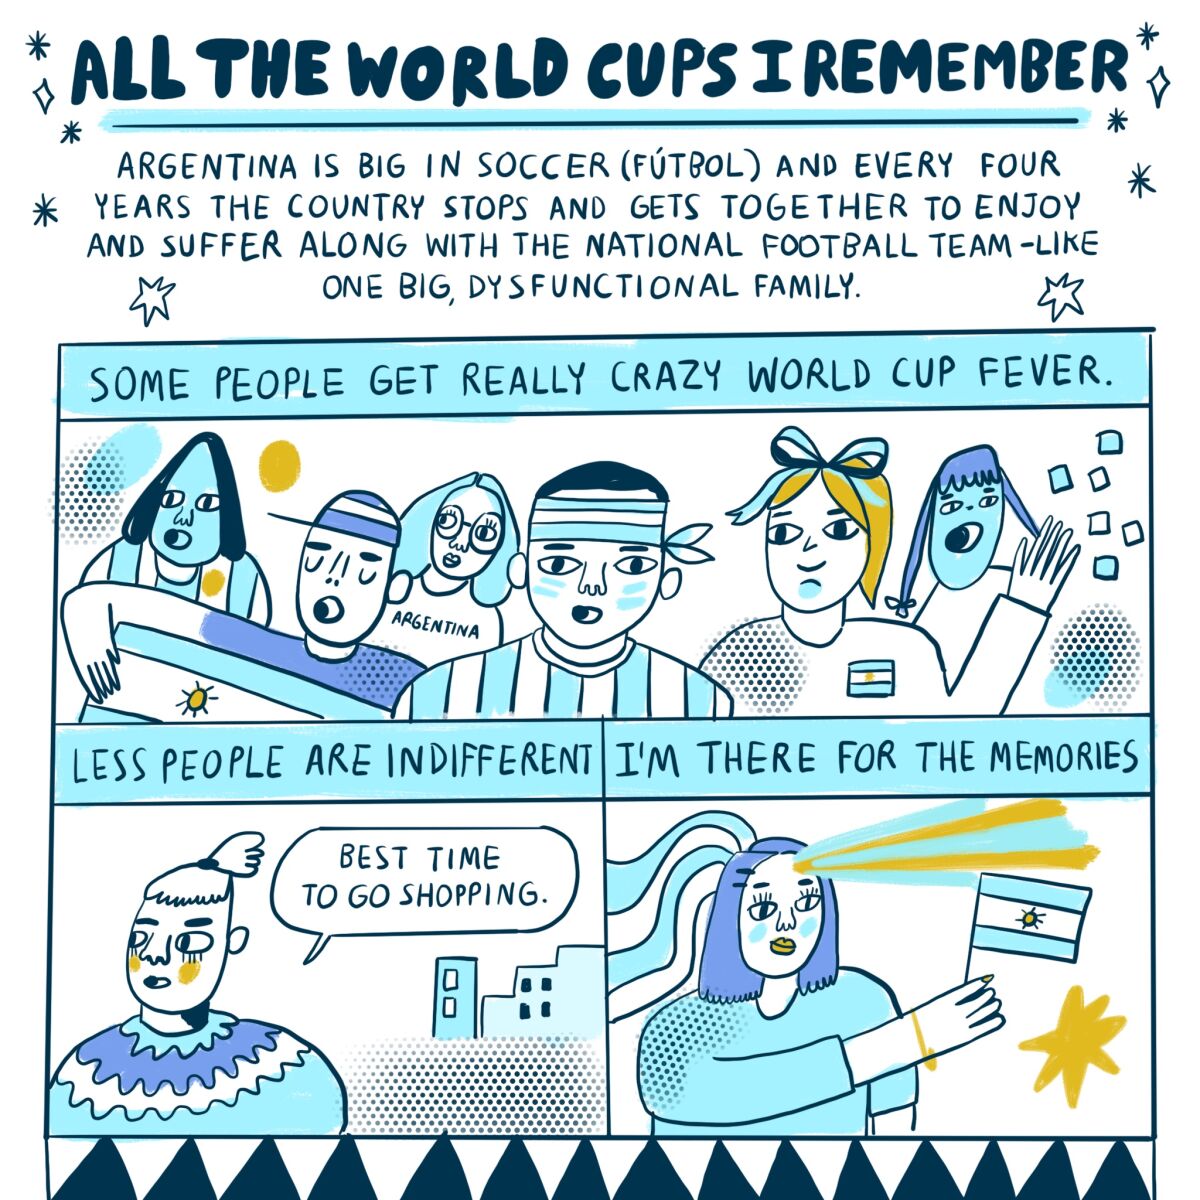 Argentina is great at futbol and every four years the country comes together to enjoy and suffer.